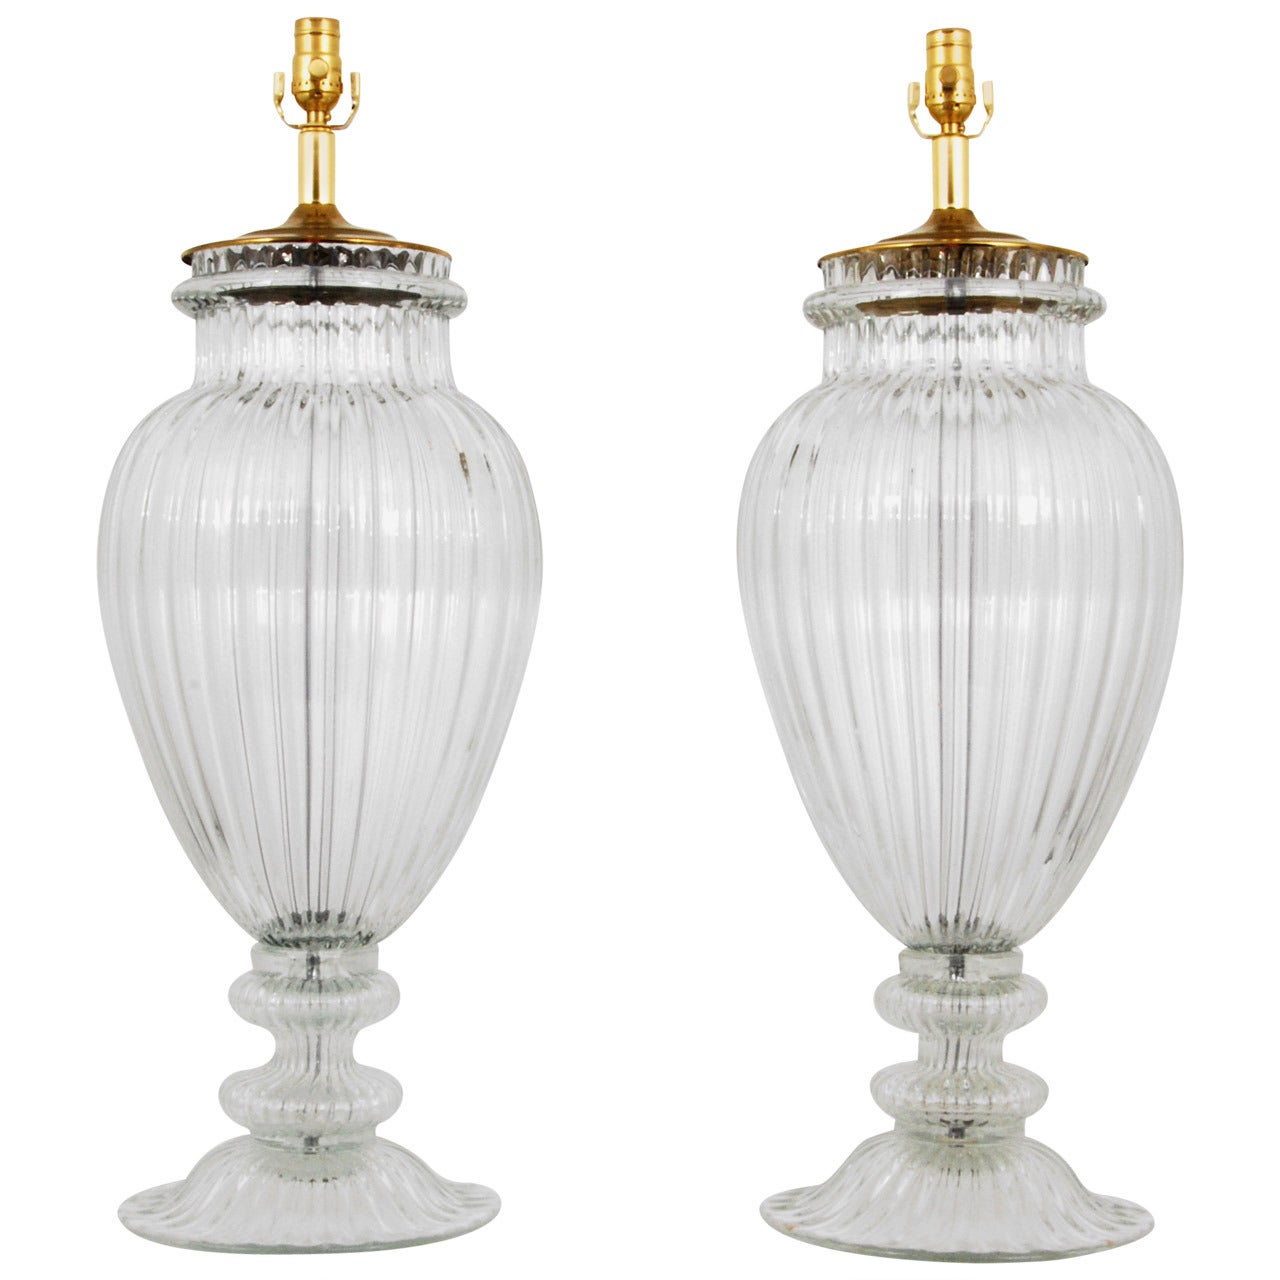 Pair of Monumental Murano Lamps, Manner of Barovier & Toso For Sale